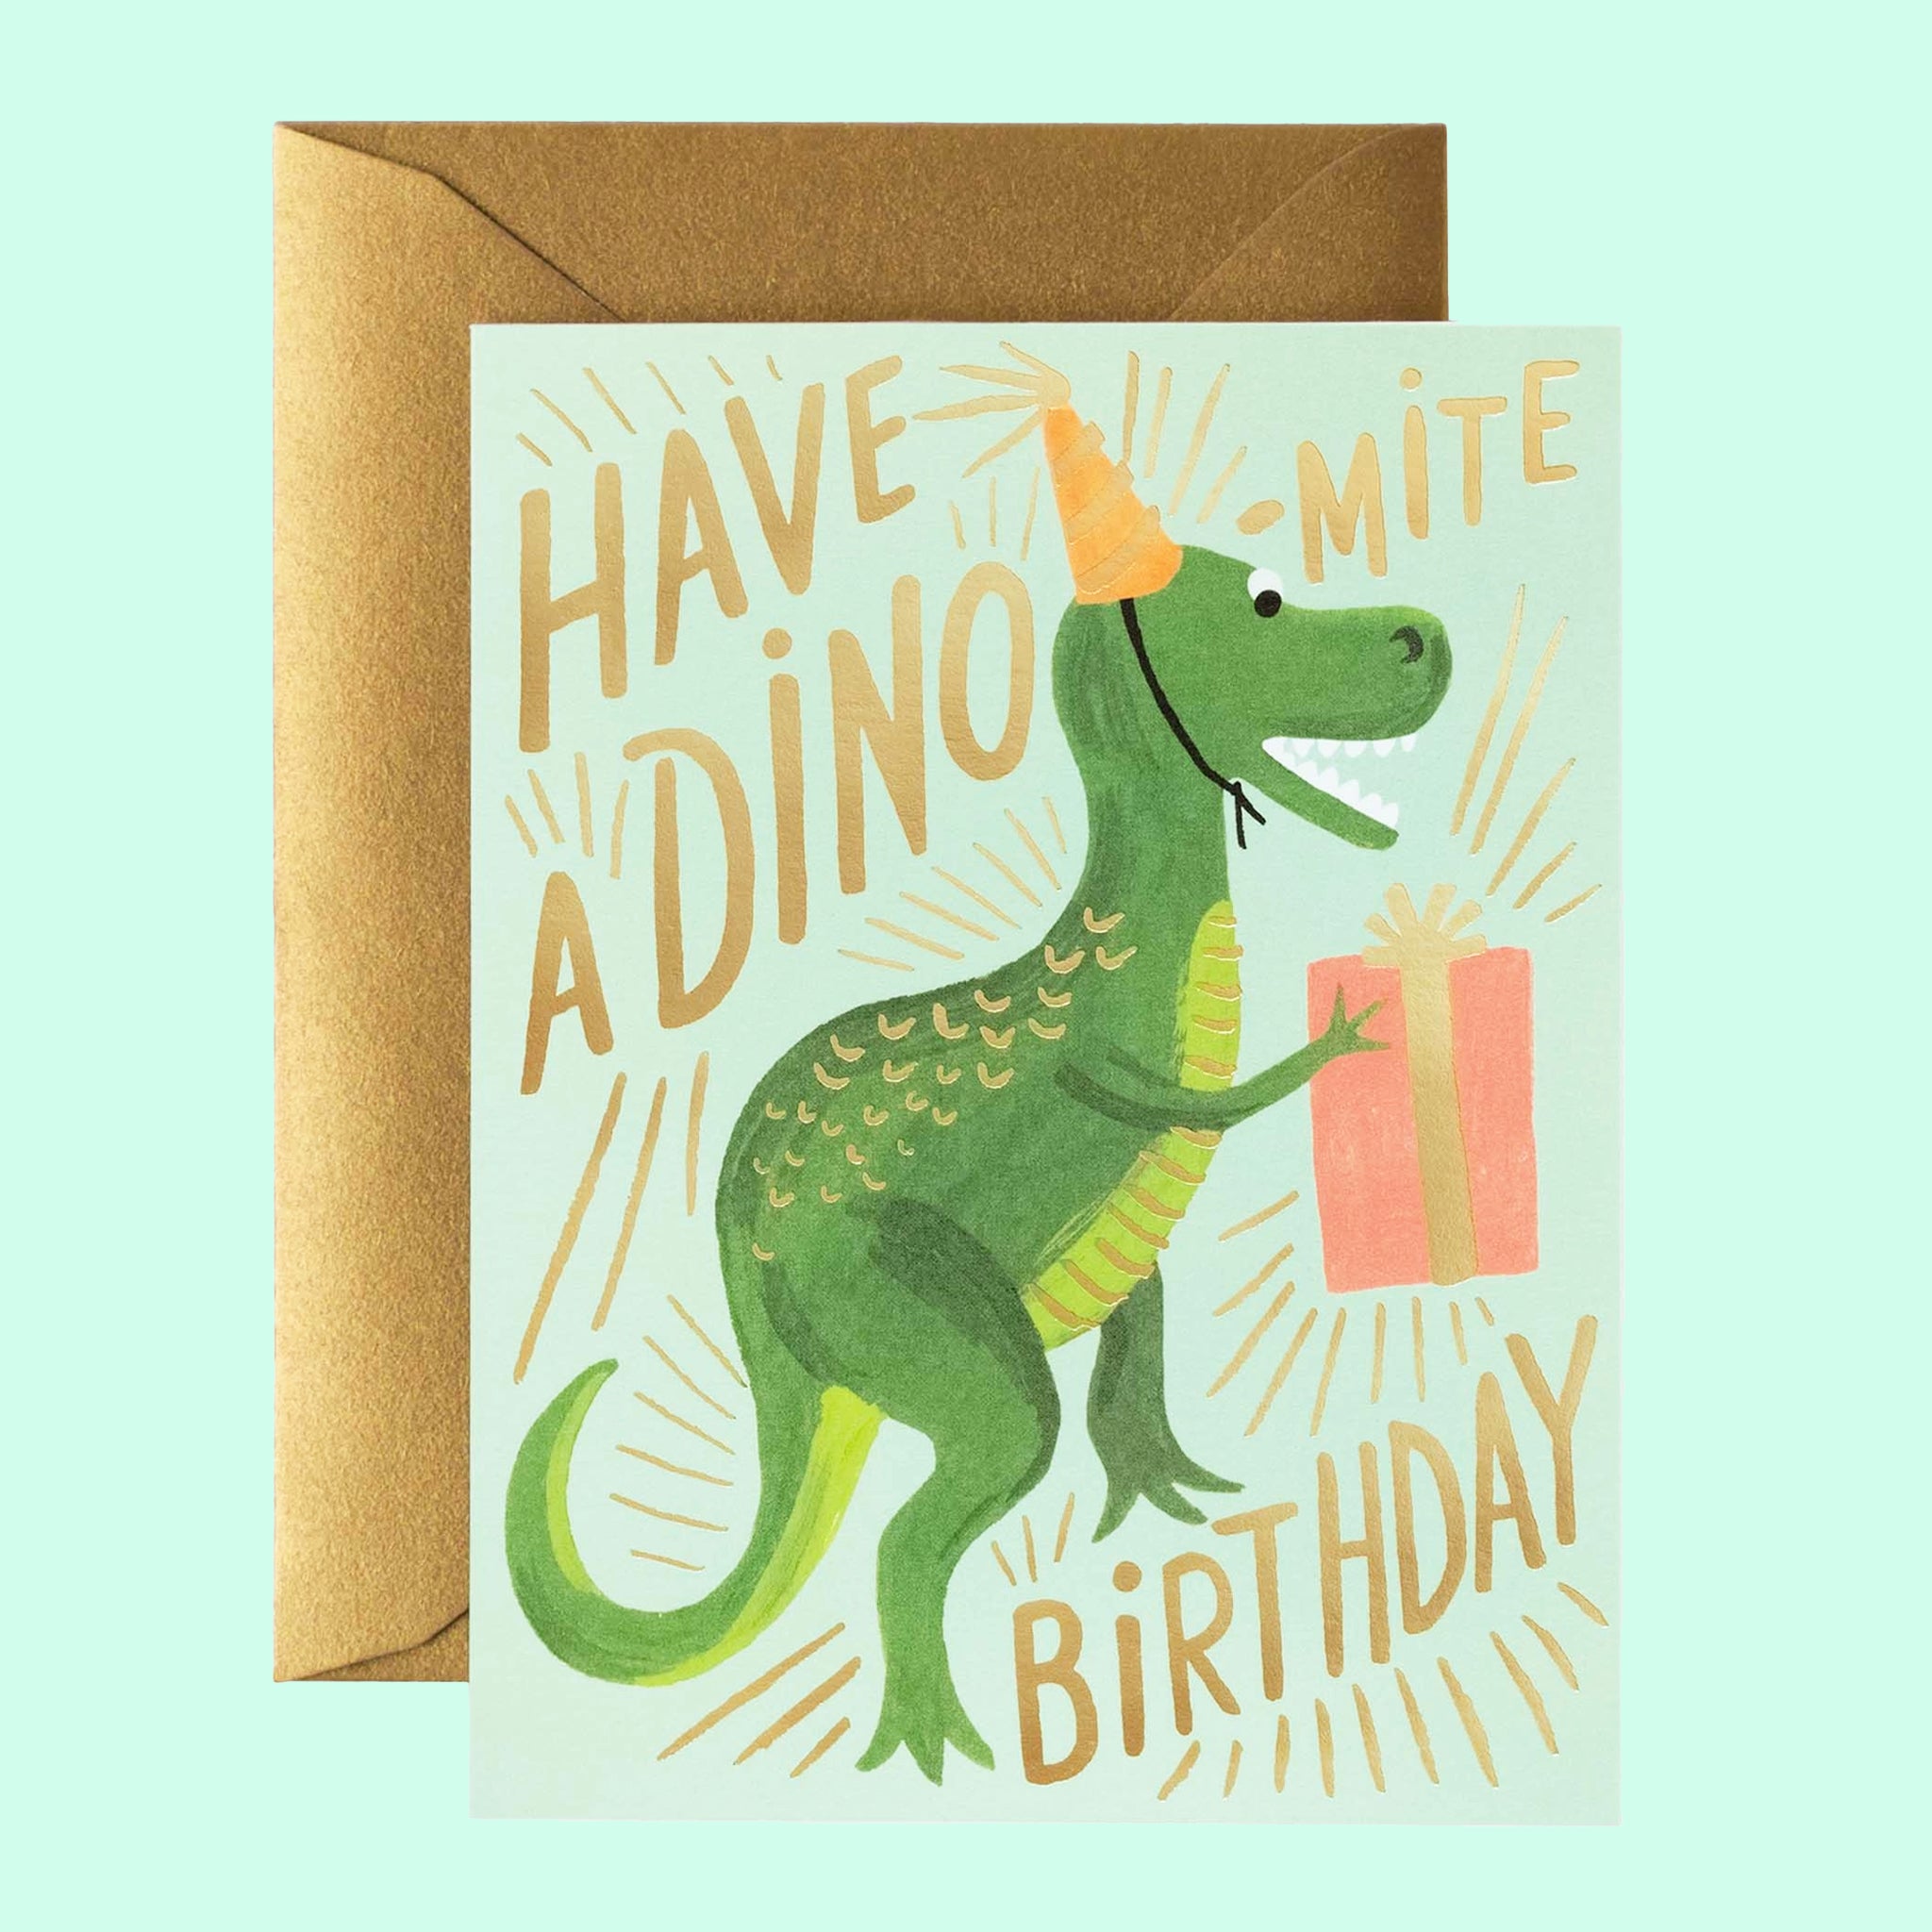 A mint card with gold letters that read, "Have A Dino-Mite Birthday" with a illustration of a green t-rex dinosaur wearing a yellow striped birthday hat and holding a pink birthday gift as well as a coordinating envelope.